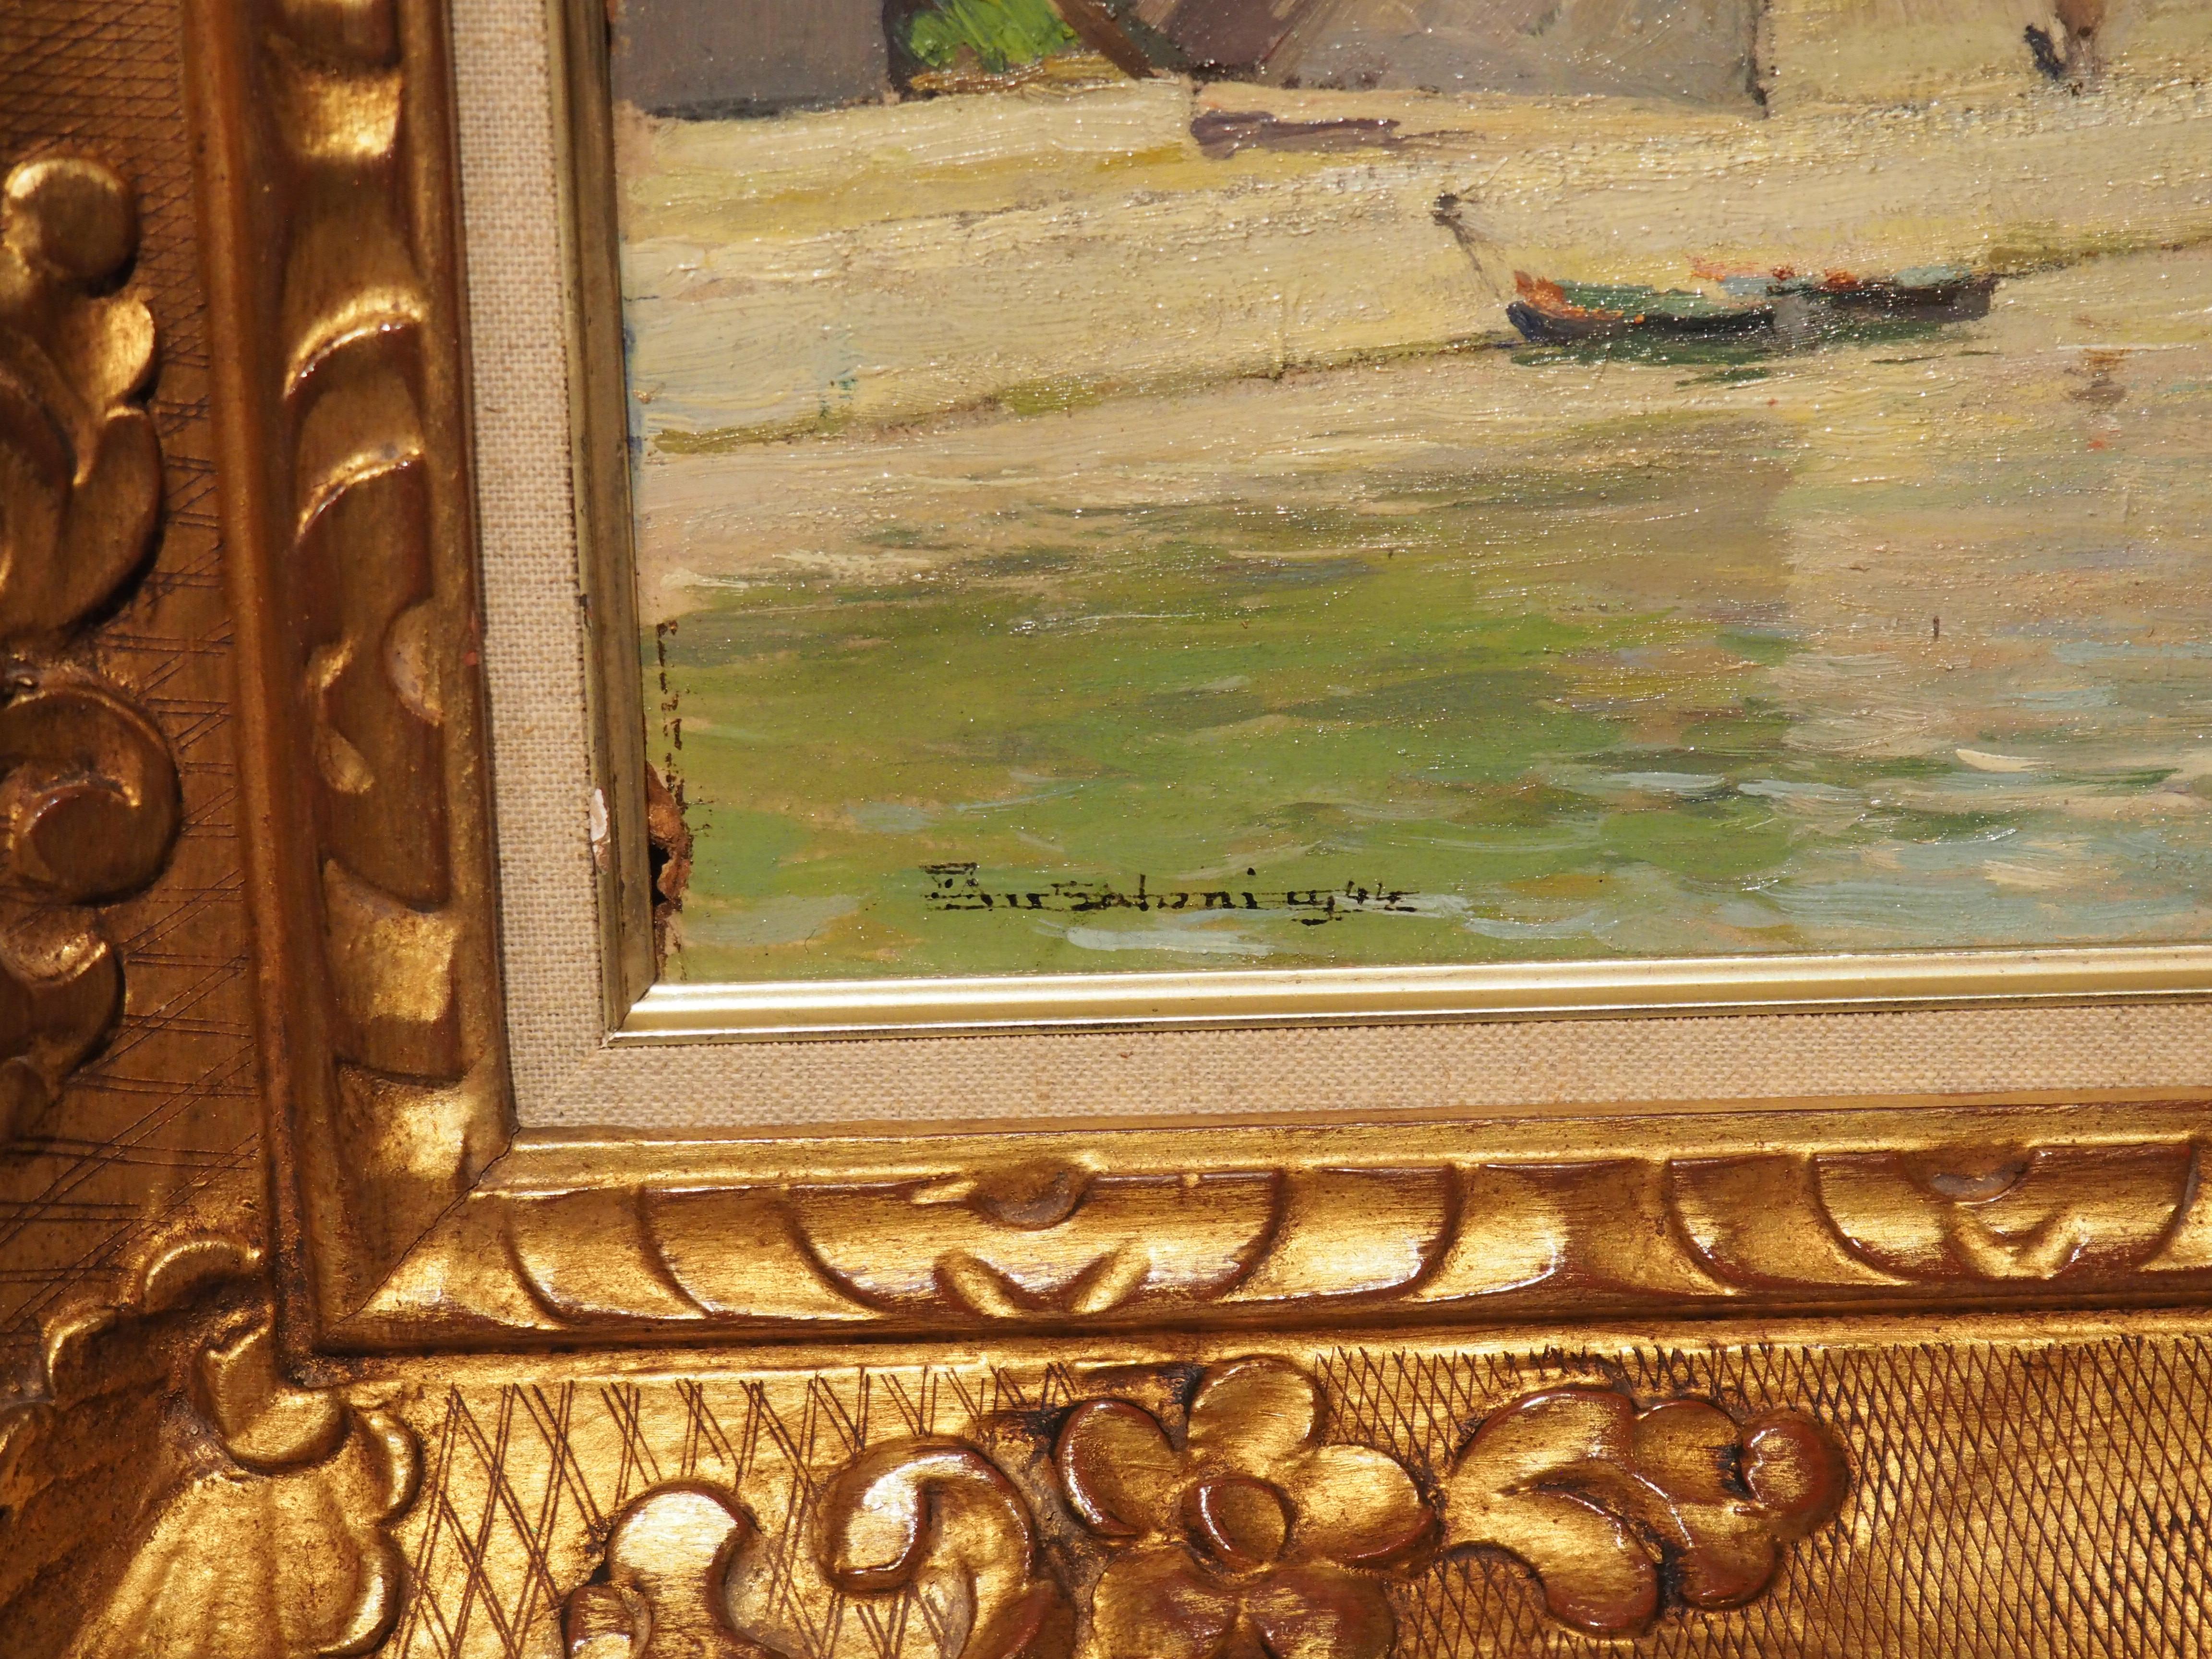 Le Pont Neuf, the oldest existing bridge to span the Seine in Paris, is the subject of this painted board in giltwood frame, signed and dated in the lower left corner by the artist, “Ansaloni 44”. A portion of the famed arched bridge can be seen